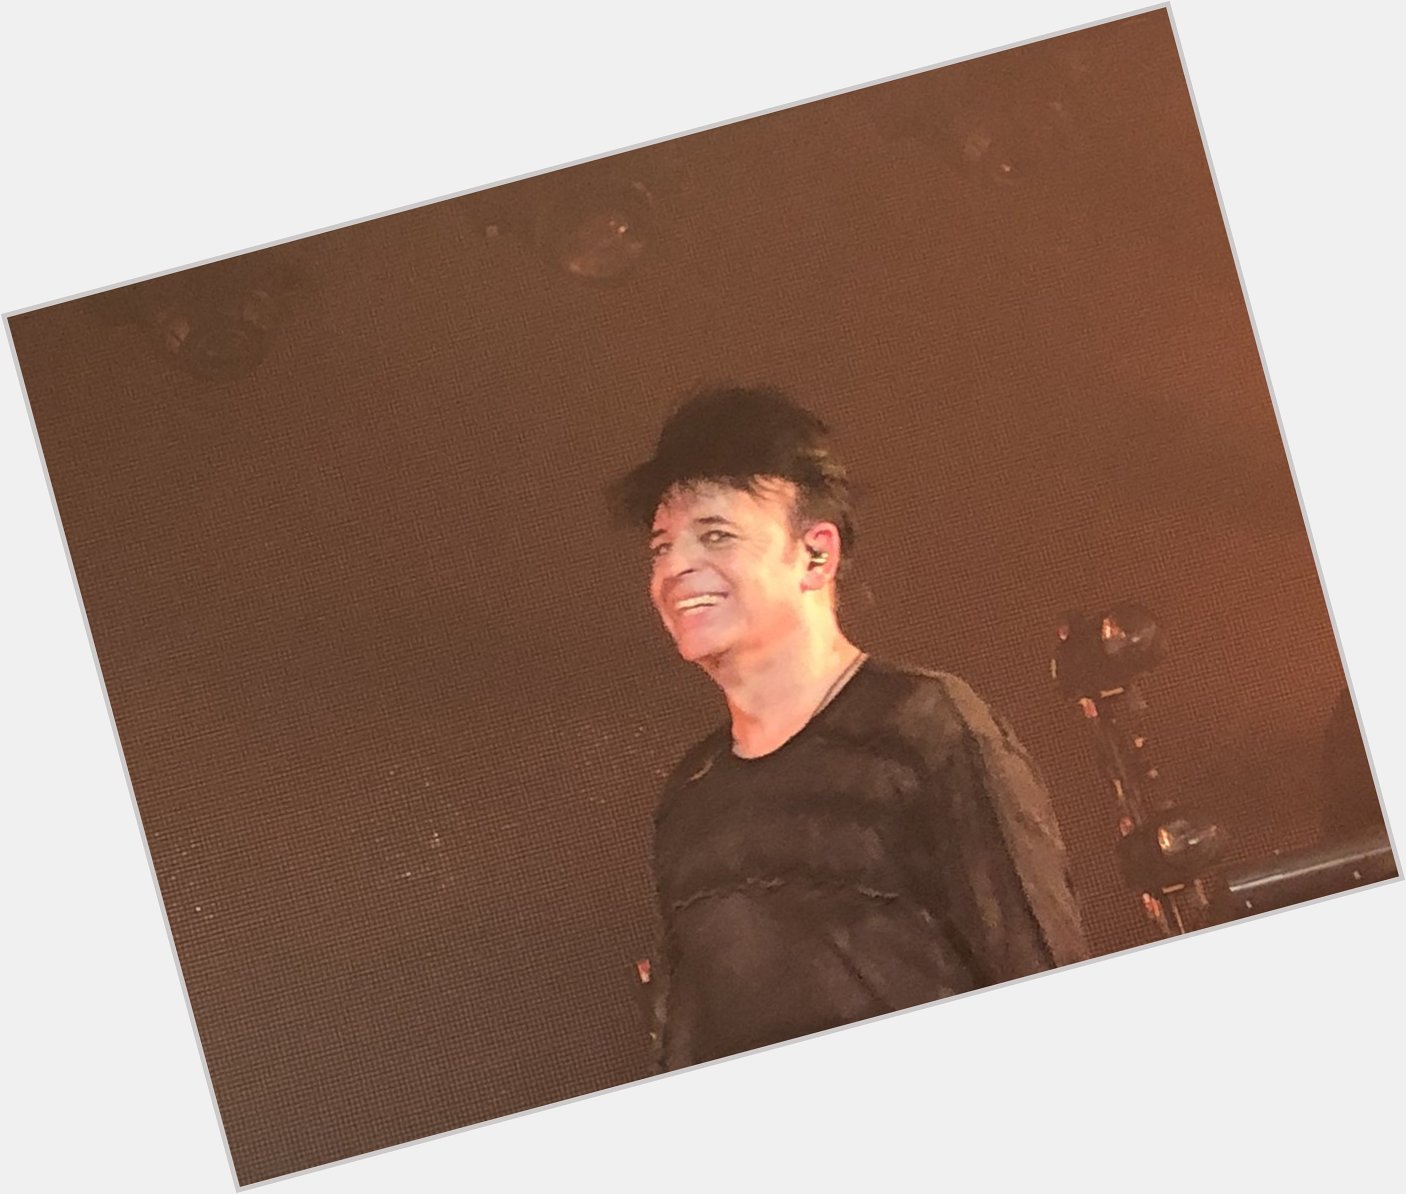 Happy 64th Birthday to singer Gary Numan. It was great to see Gary perform live in Cardiff several years ago!   